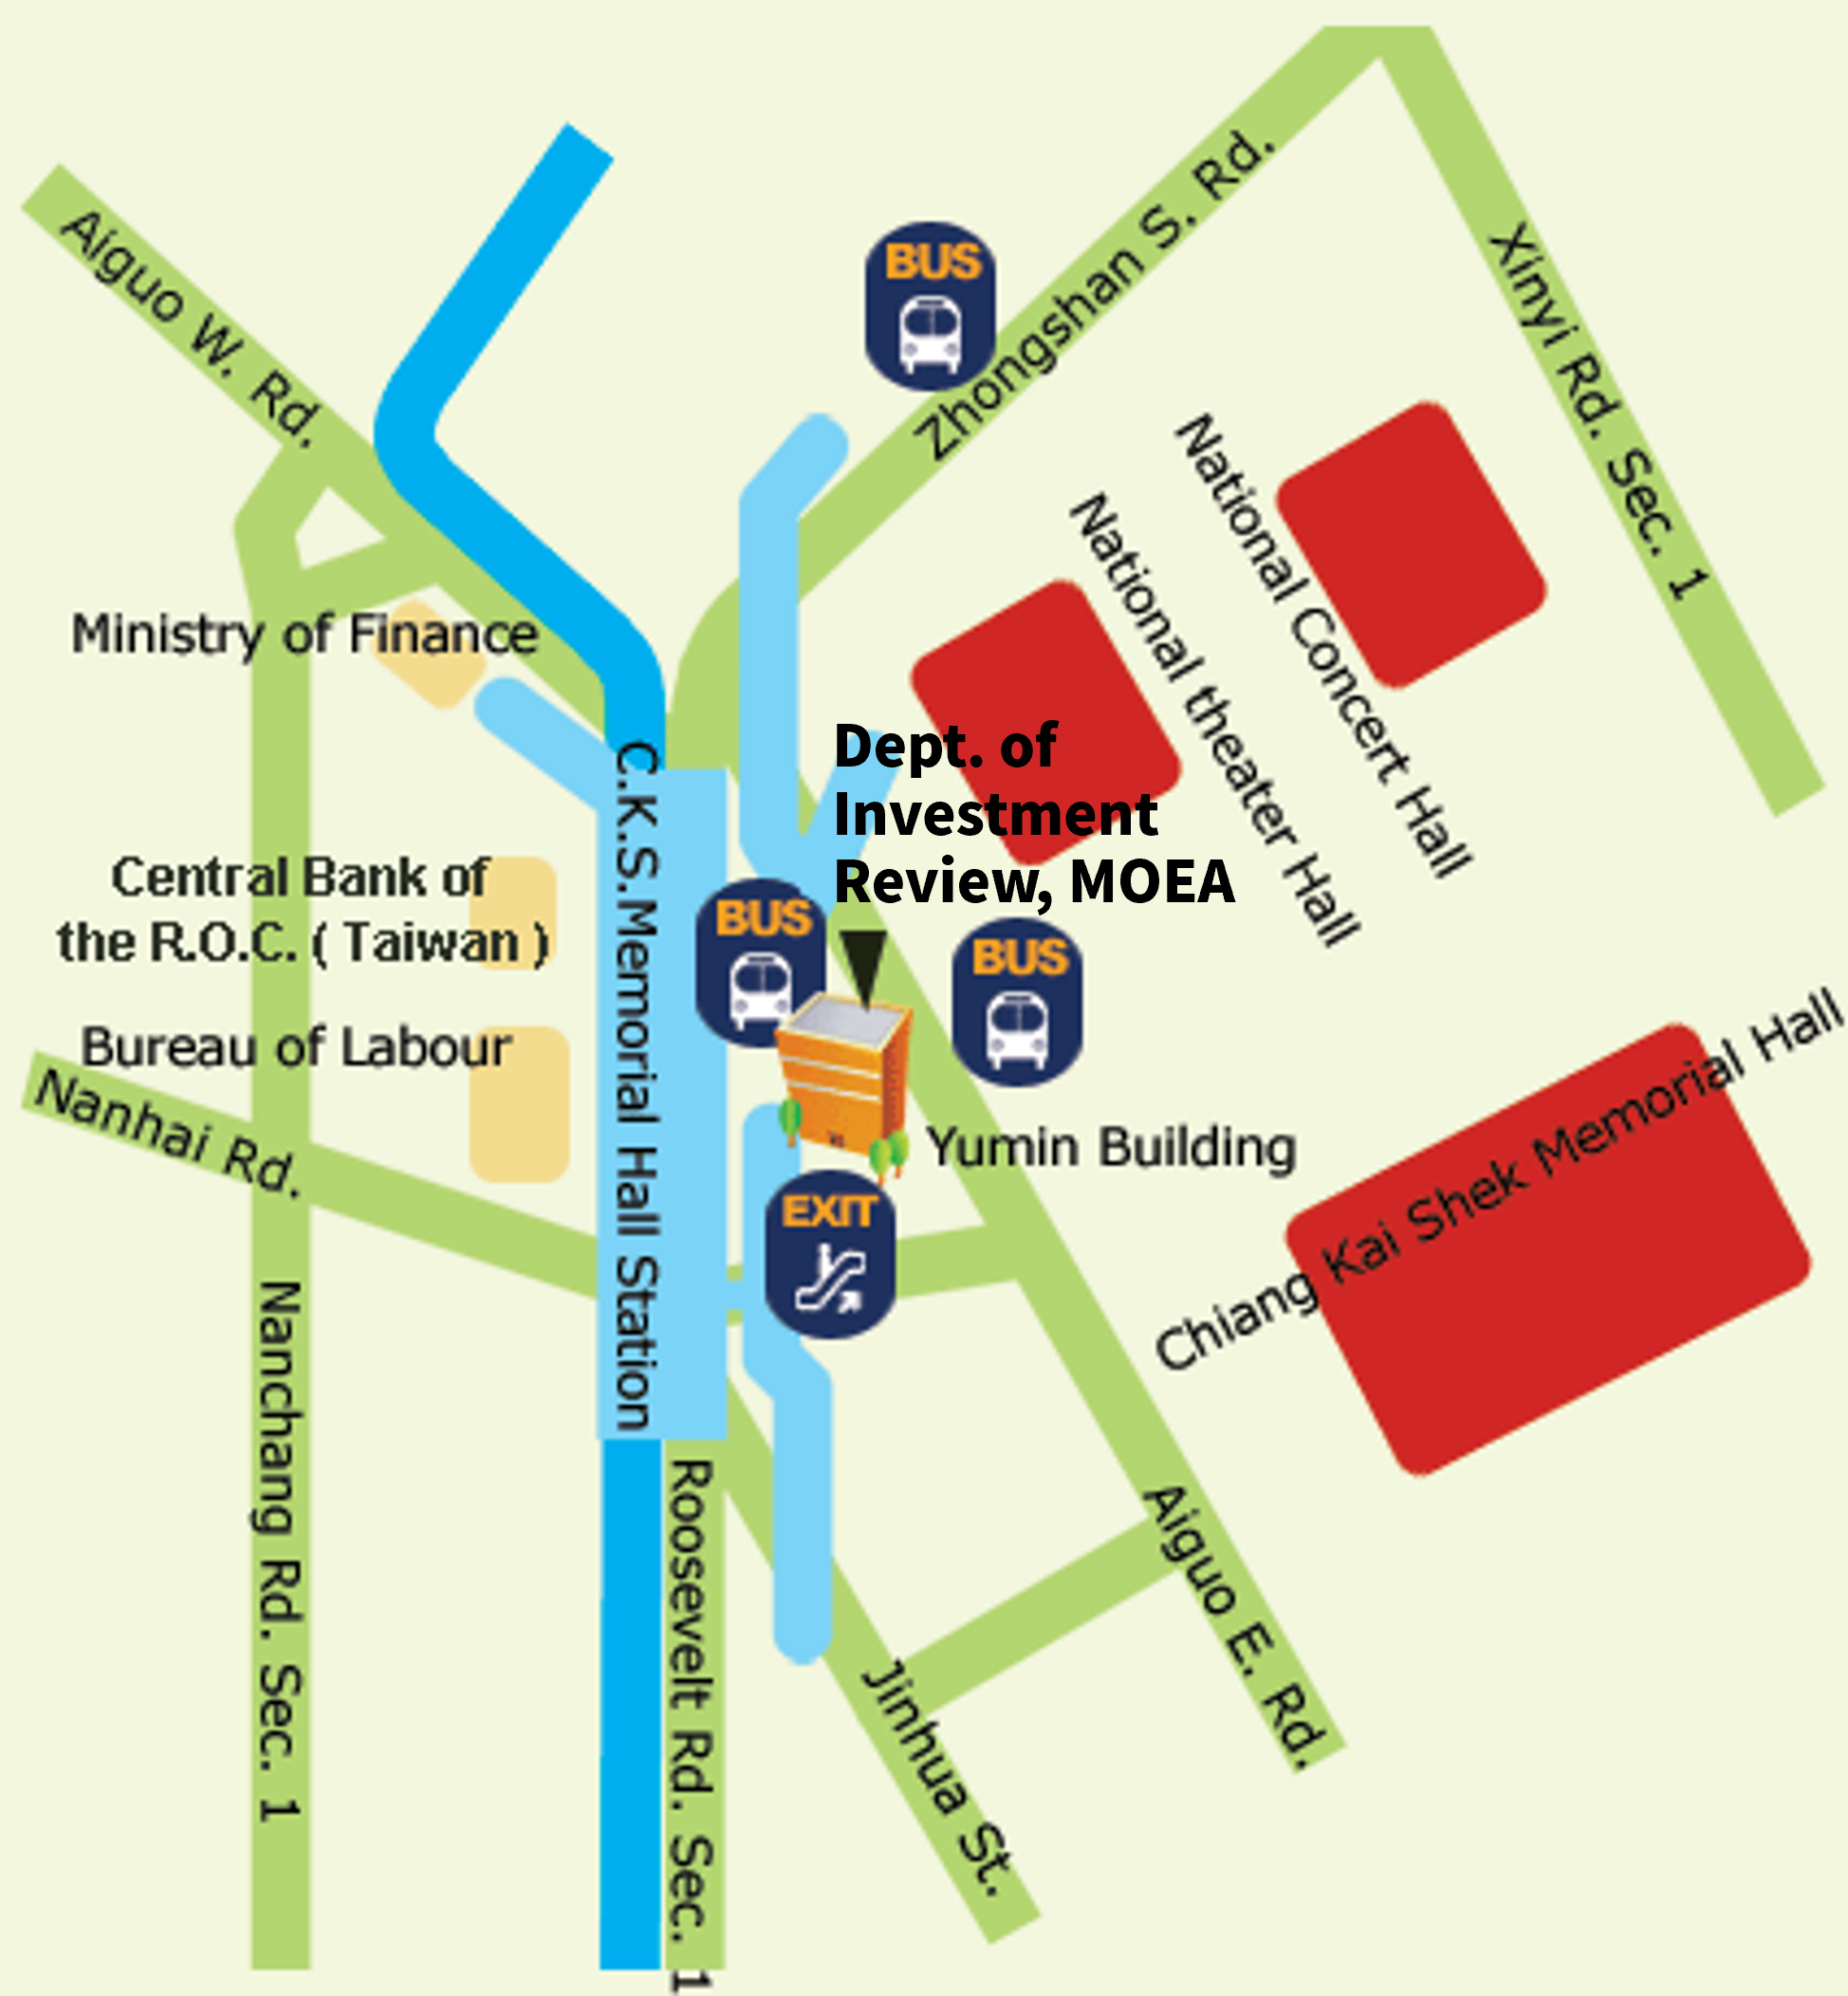  Map of the Department of Investment Review, MOEA. Bus or MRT of information, please refer below.